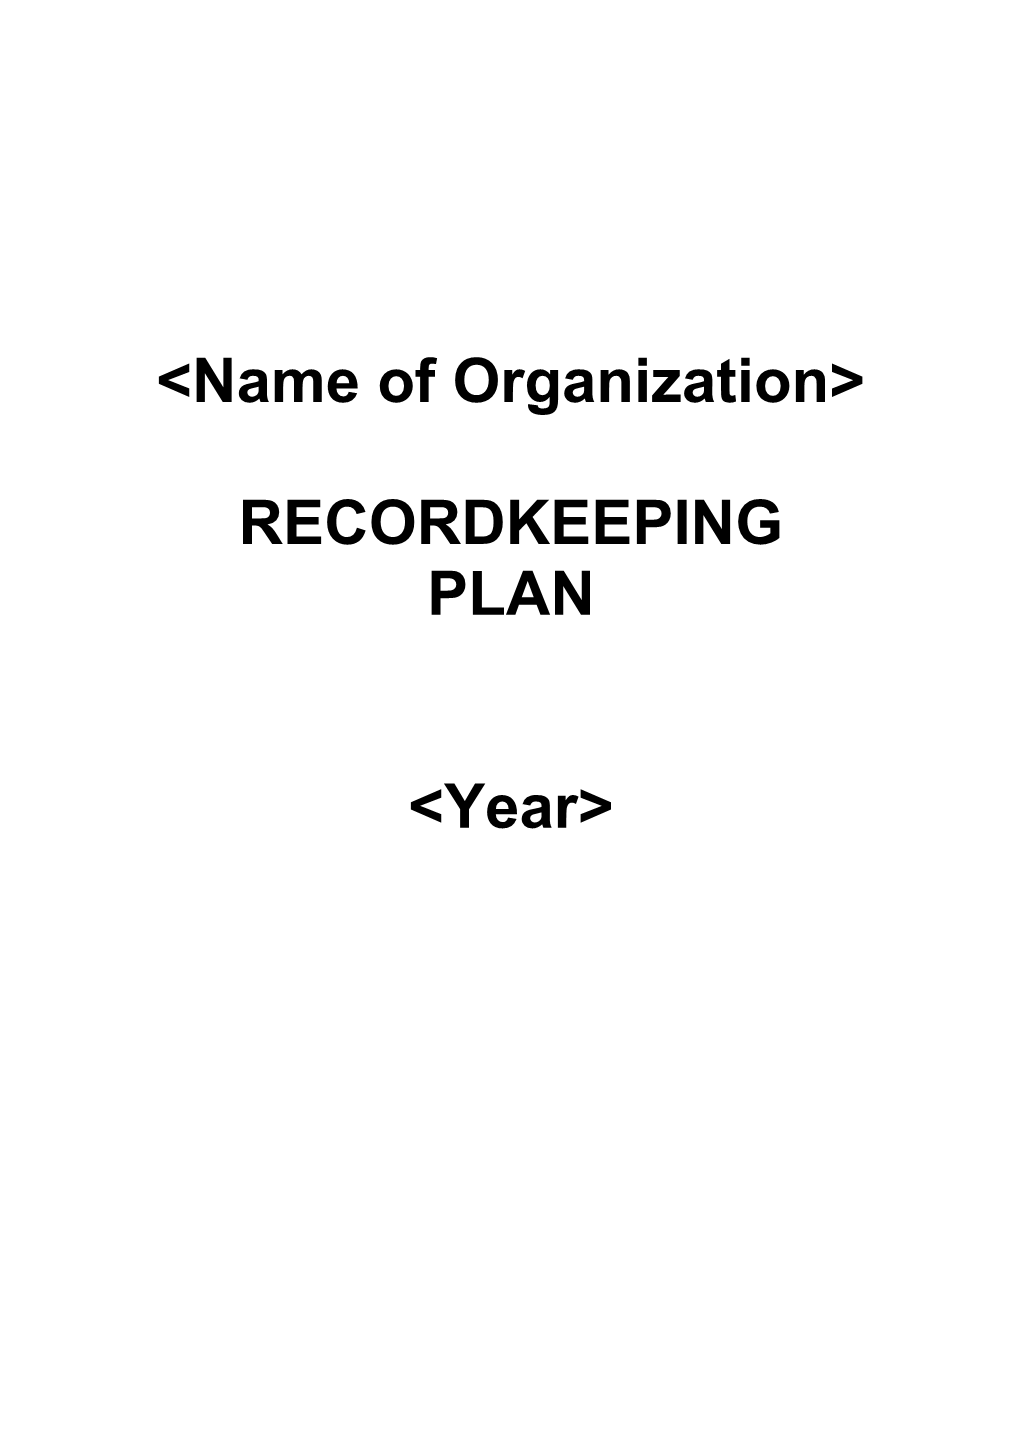 RKP (Amended) Template 2010